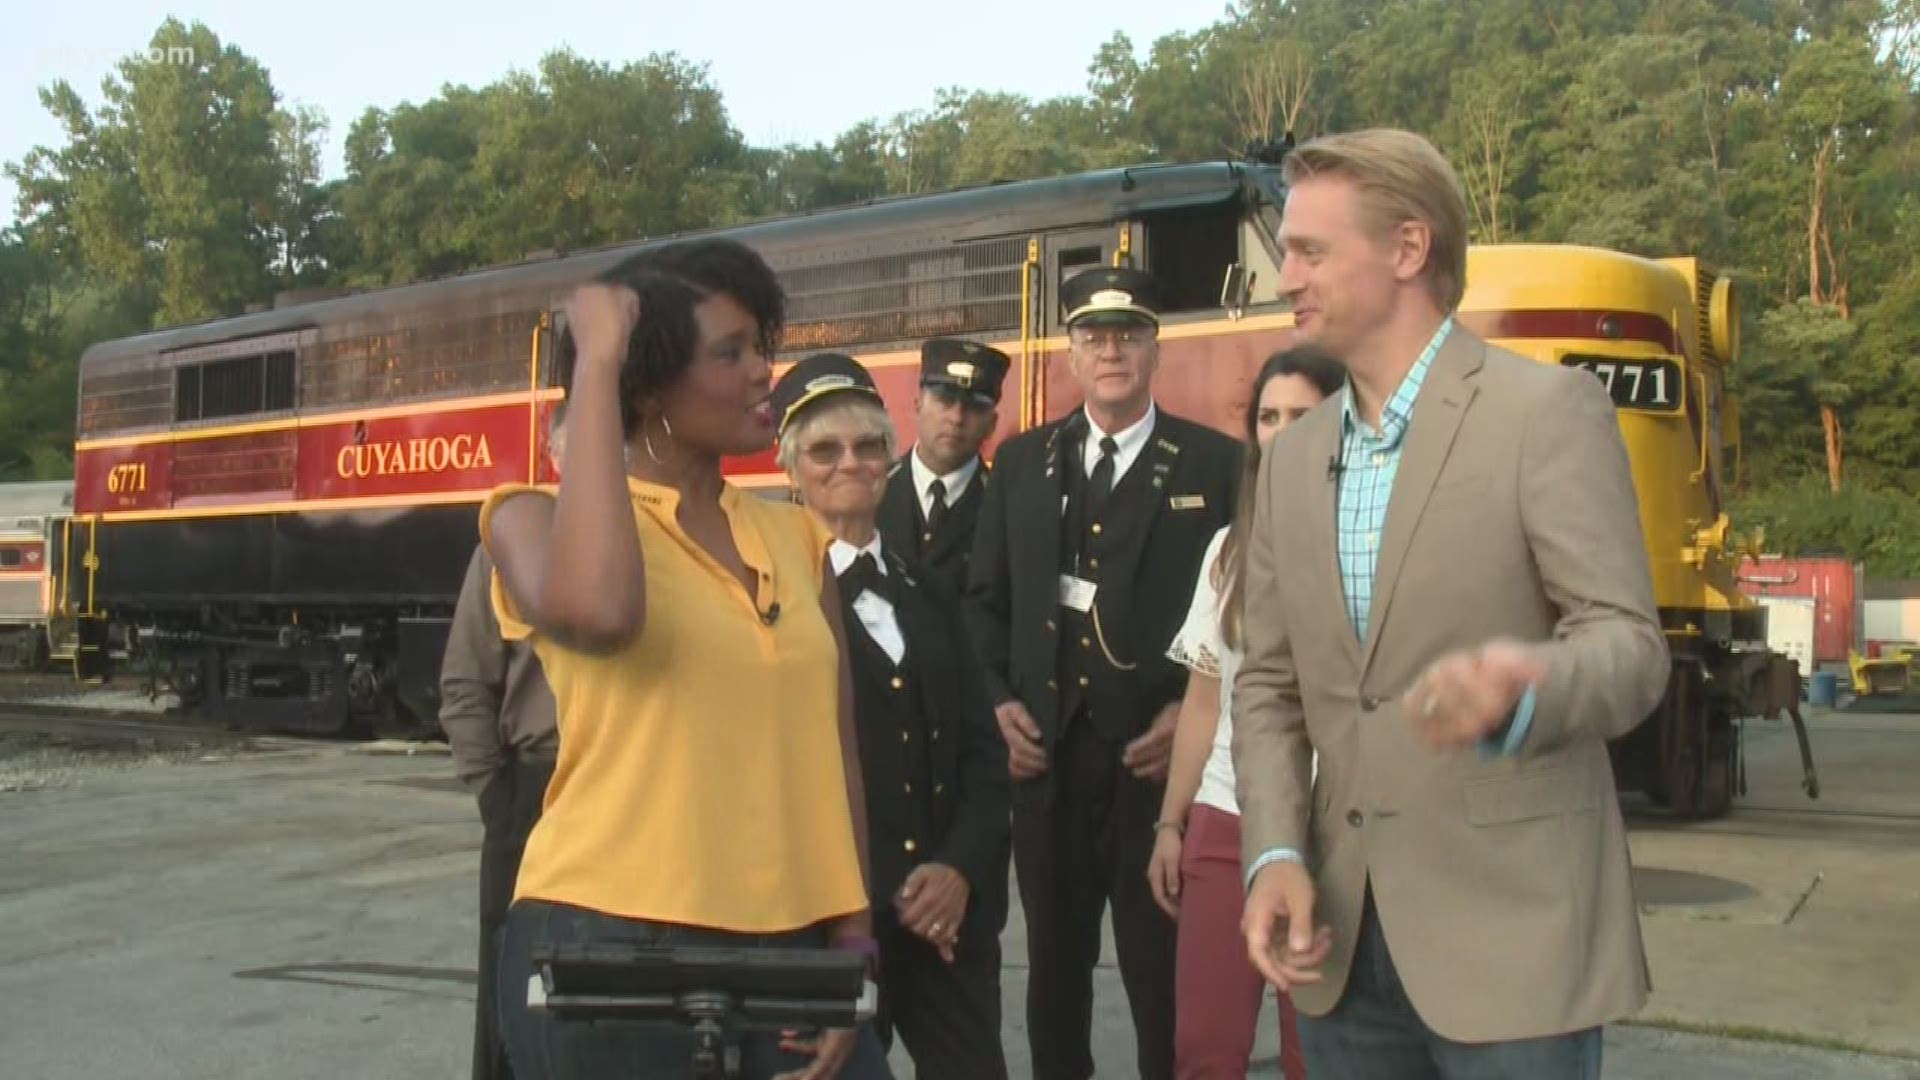 Aug. 6, 2018: WKYC's Tiffany Tarpley and Will Ujek spent the morning exploring behind the scenes of the Cuyahoga Valley Scenic Railroad.